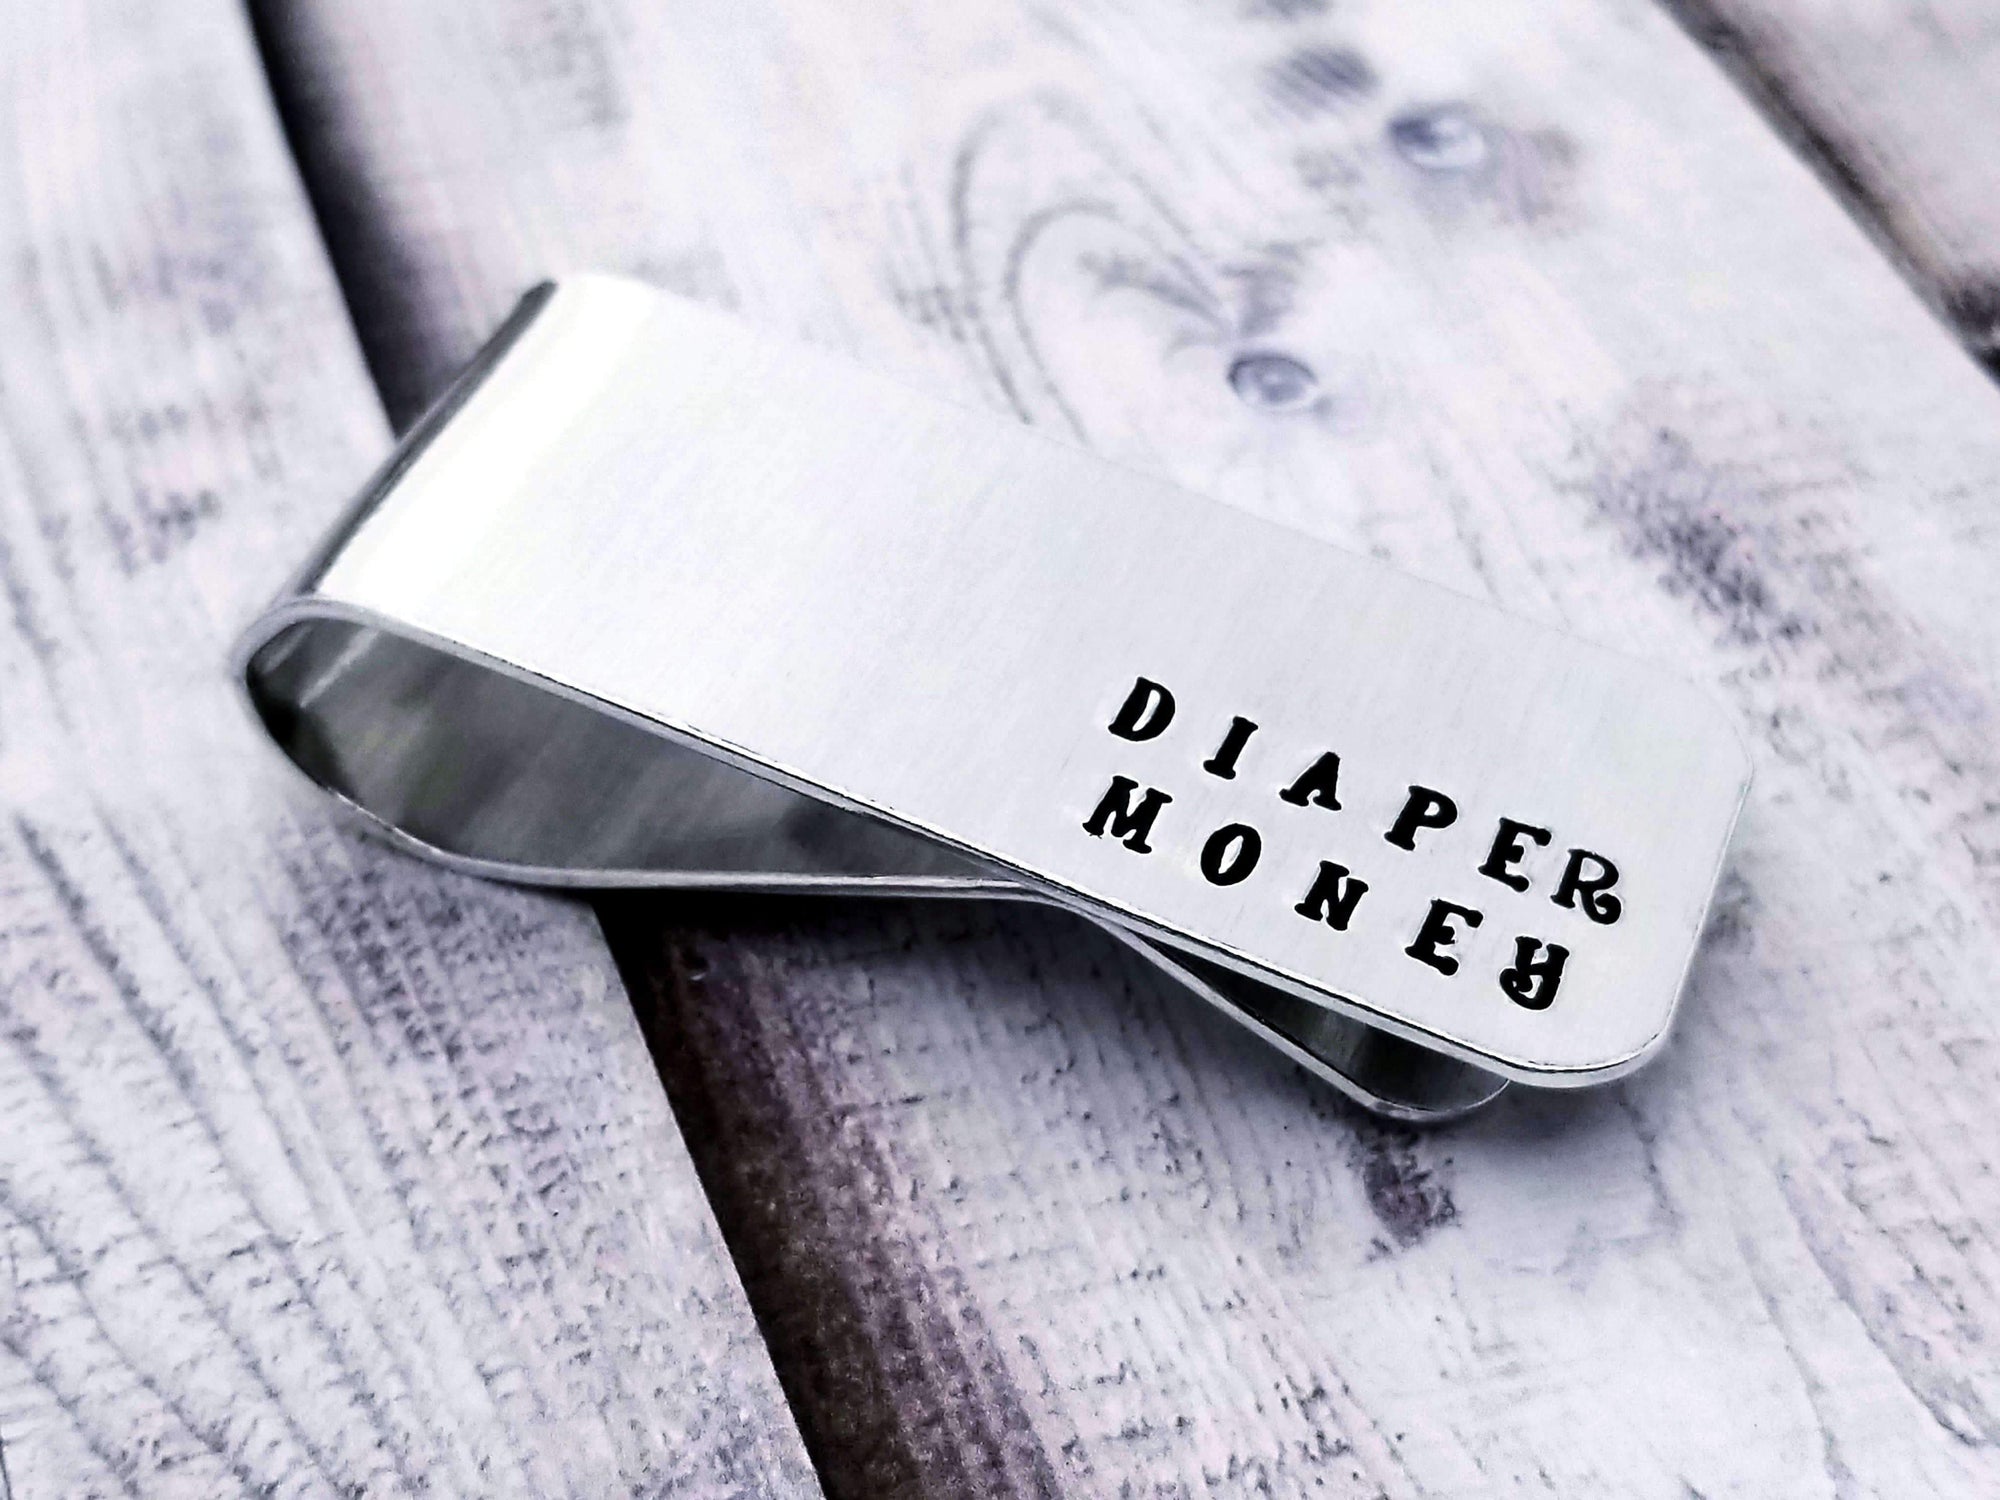 Diaper Money Gift, Beer Money Clip, Custom Money Clip, Funny Dad Gift #1 Dad, Present for Dad, Fathers Day Gift, Gift for Dad